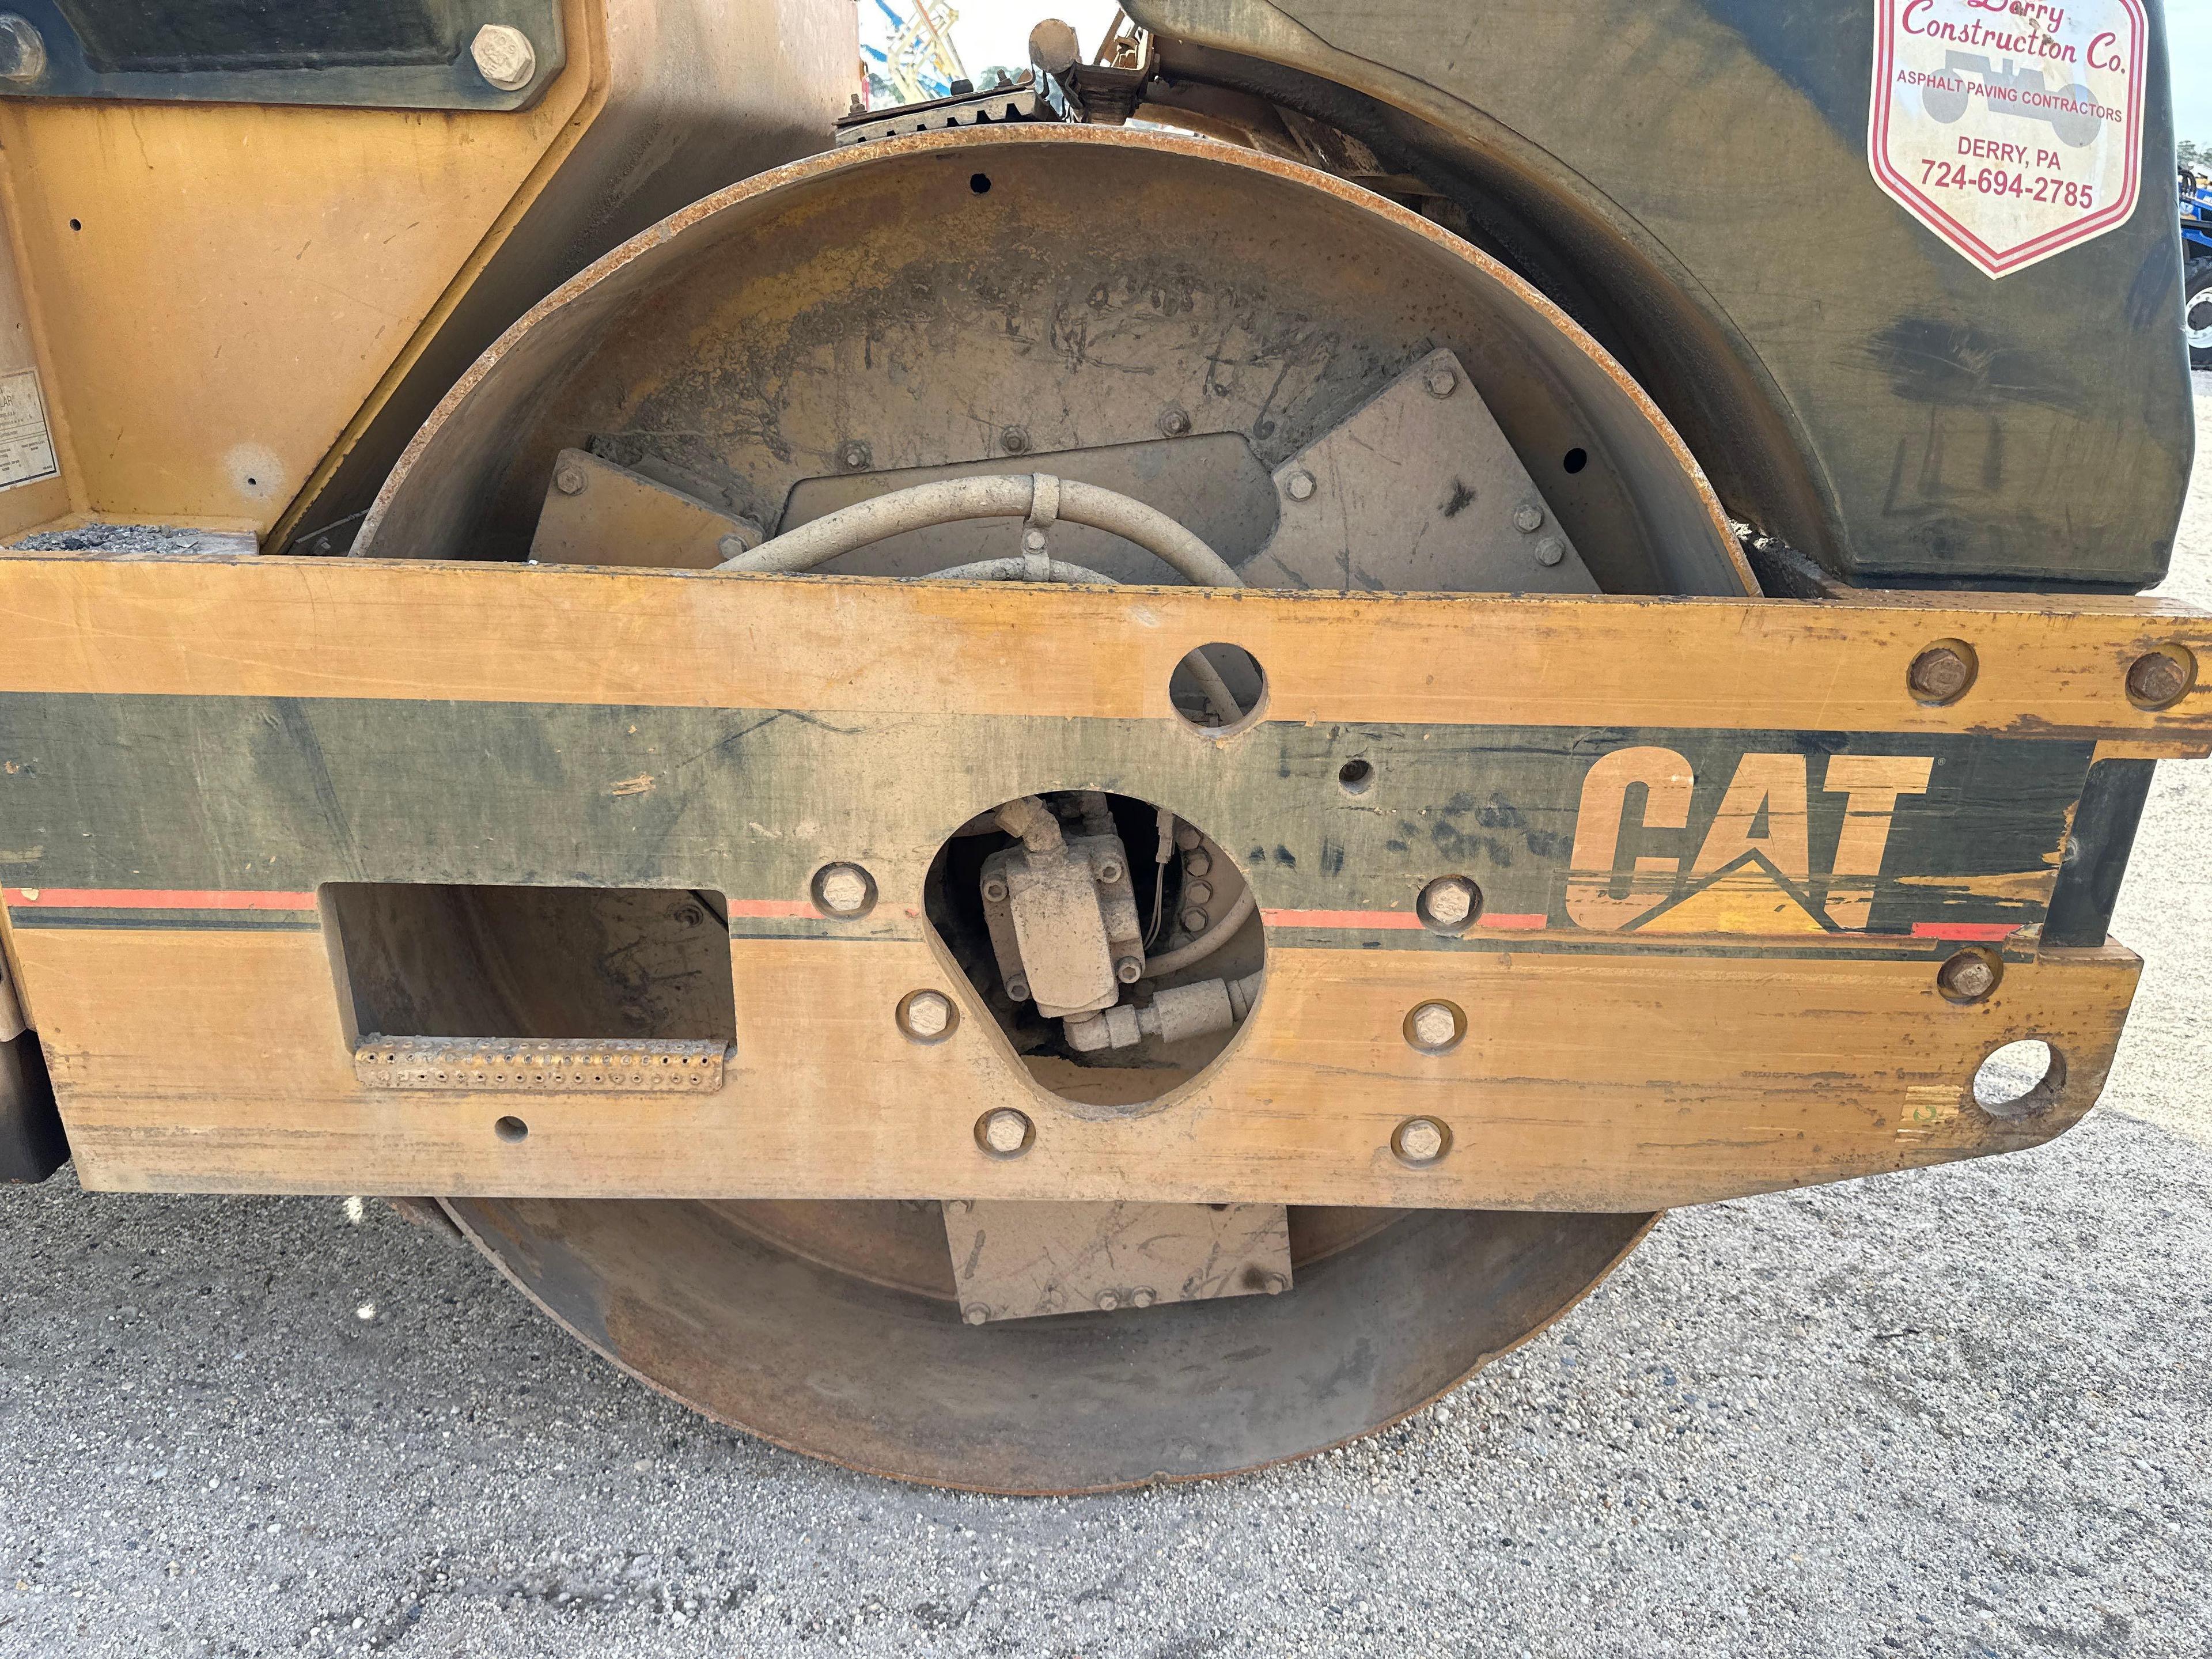 CAT CB534C ASPHALT ROLLER SN:5HN00706 powered by Cat diesel engine, equipped with OROPS, 79in.